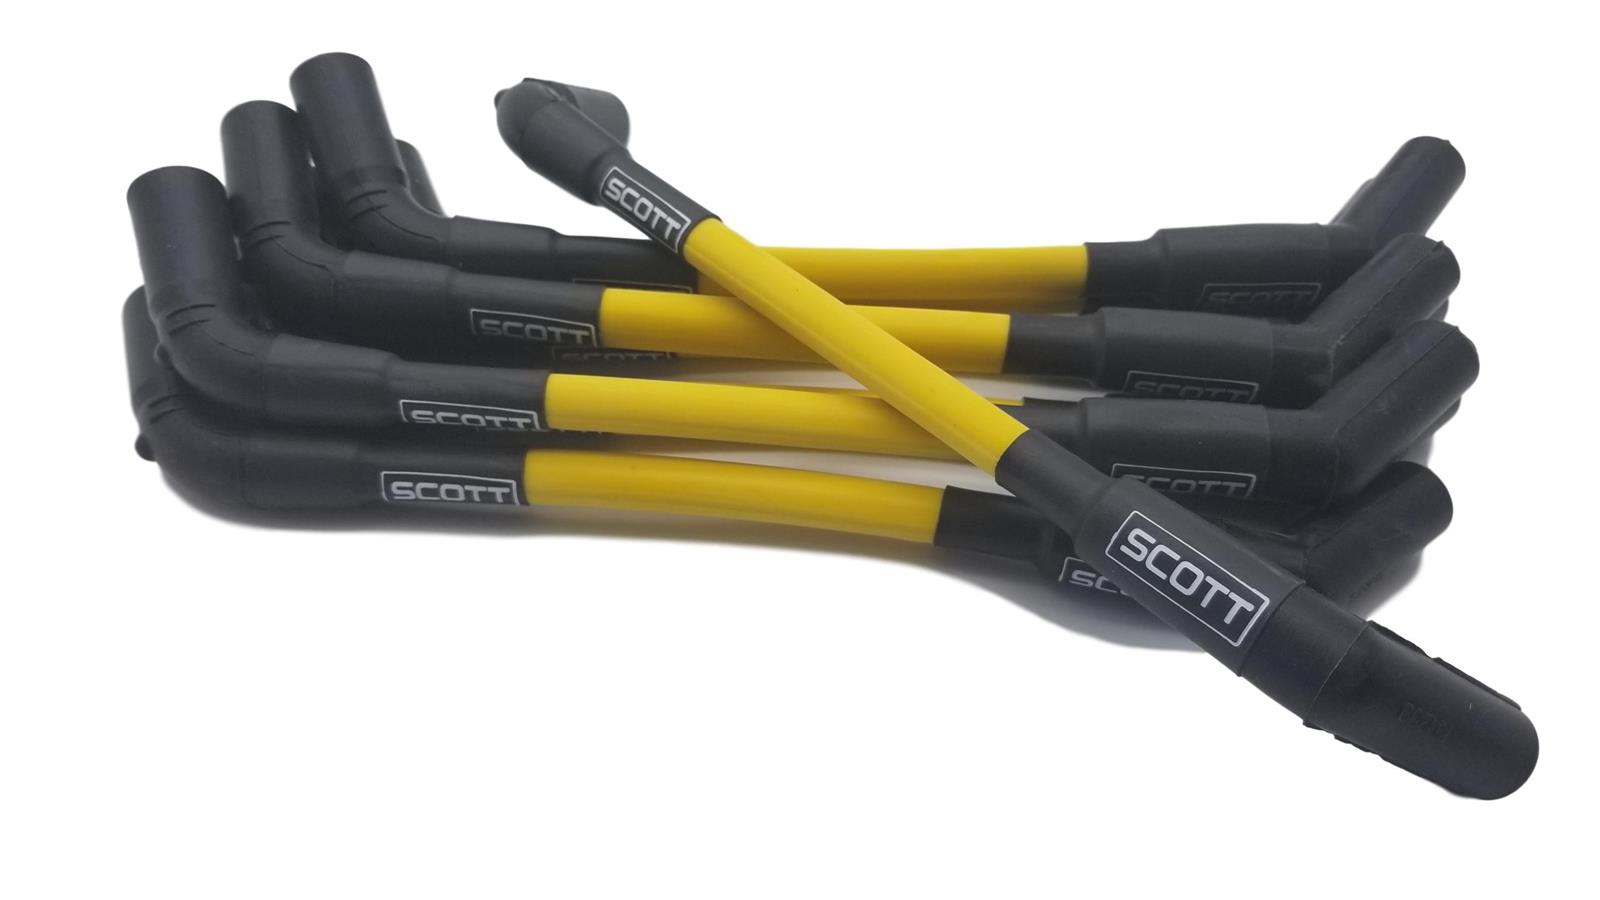 Scott Perf, High Performance Yellow Spark Plug Wire Set of 8, All LSx Series Engines Corvette and Camaro